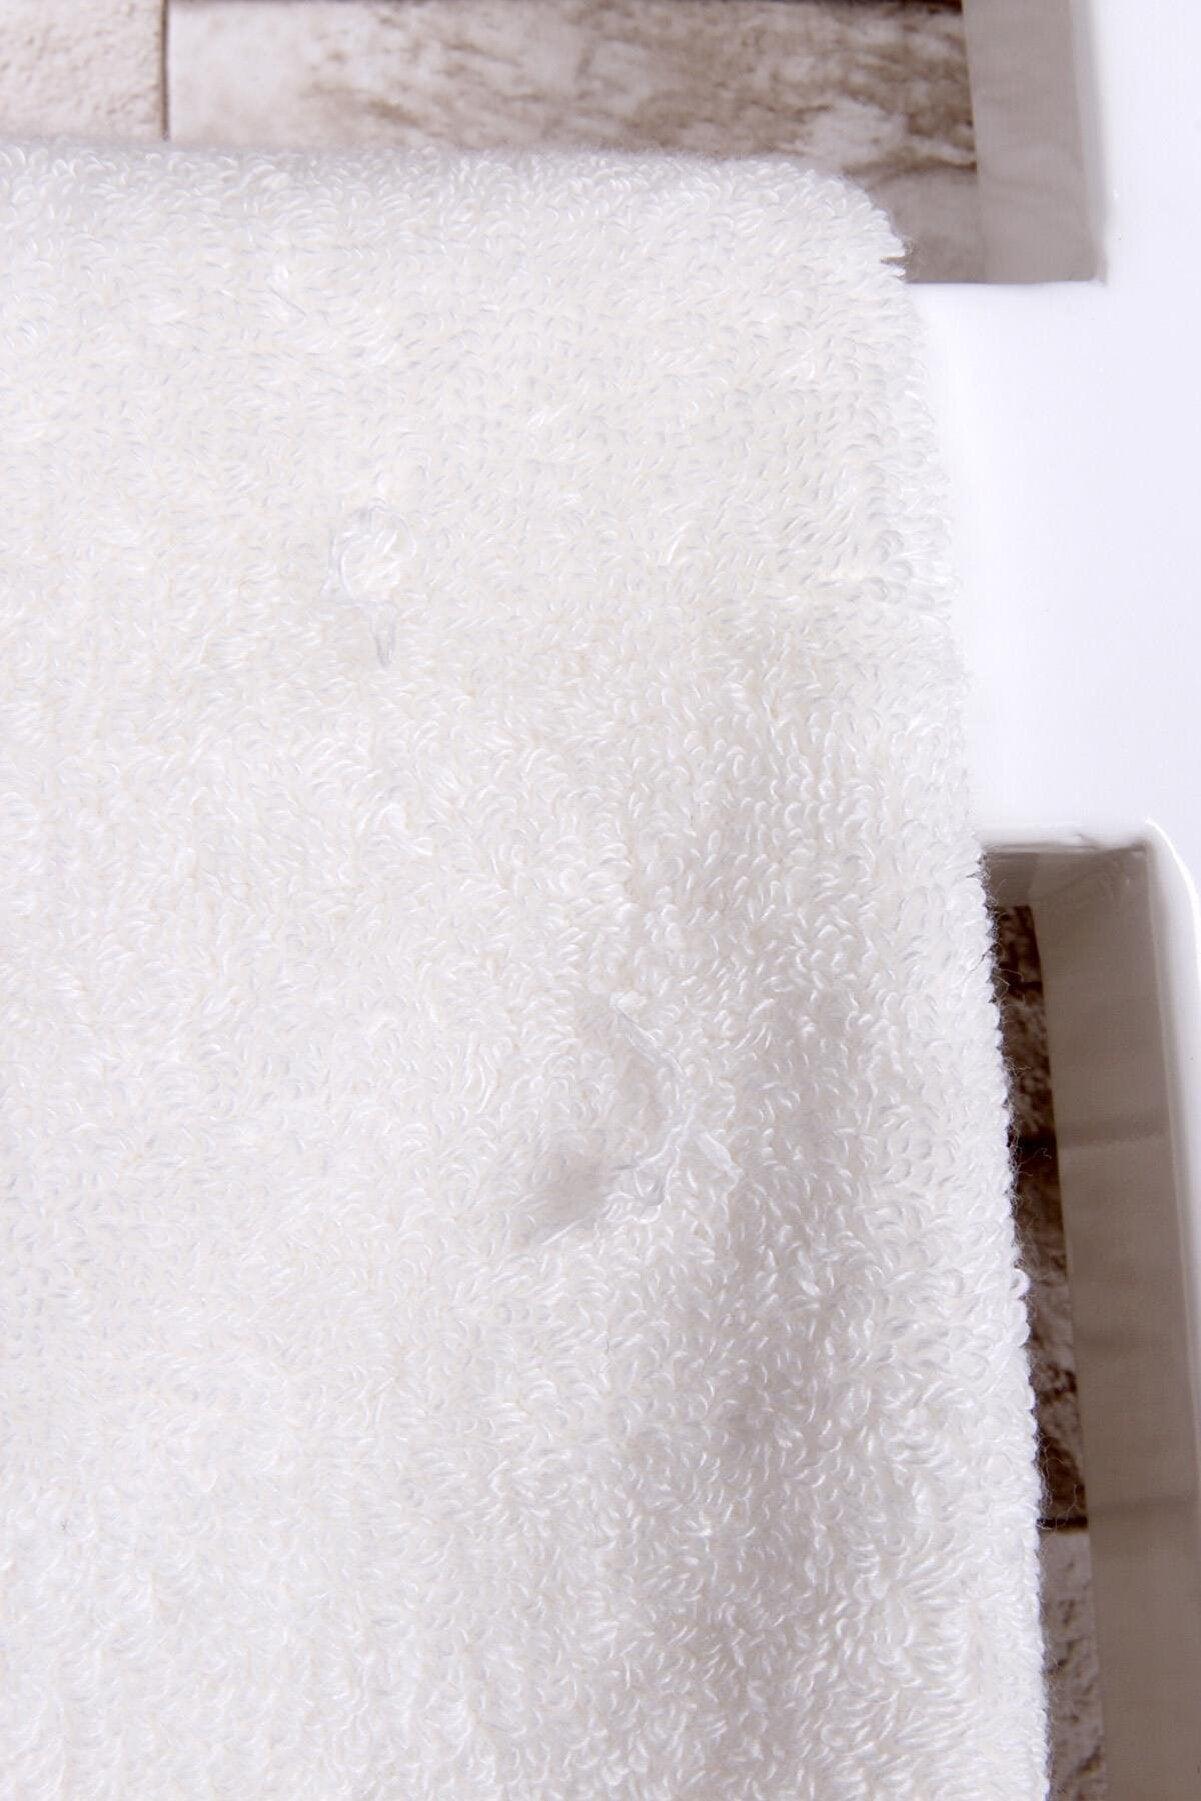 70x140 Bamboo Bath Towel White (Outlet) - sinnohome 